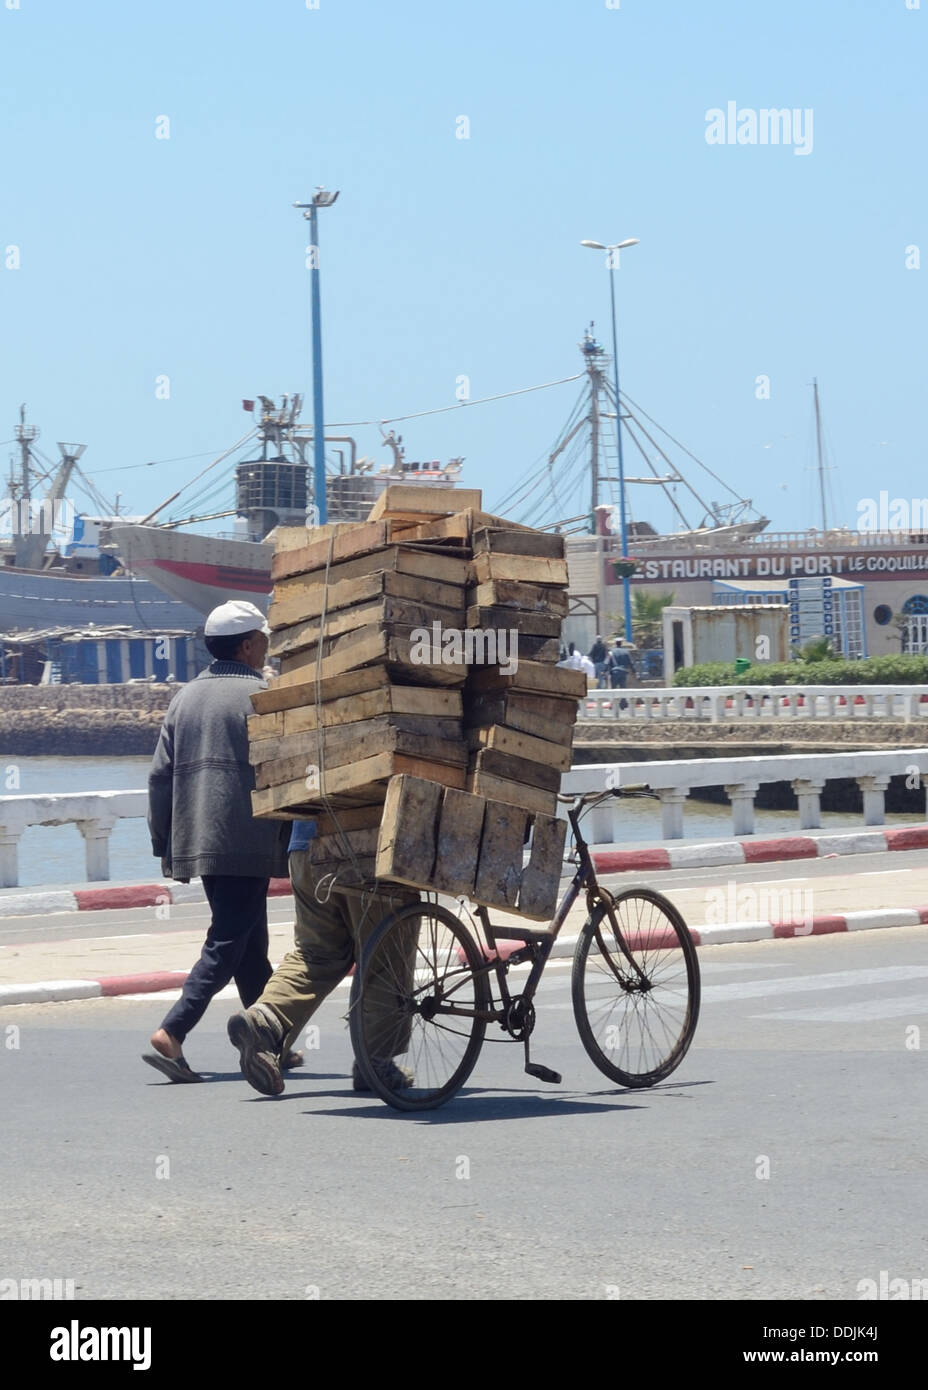 Two men pushing wooden pallets on a bike down a road Stock Photo